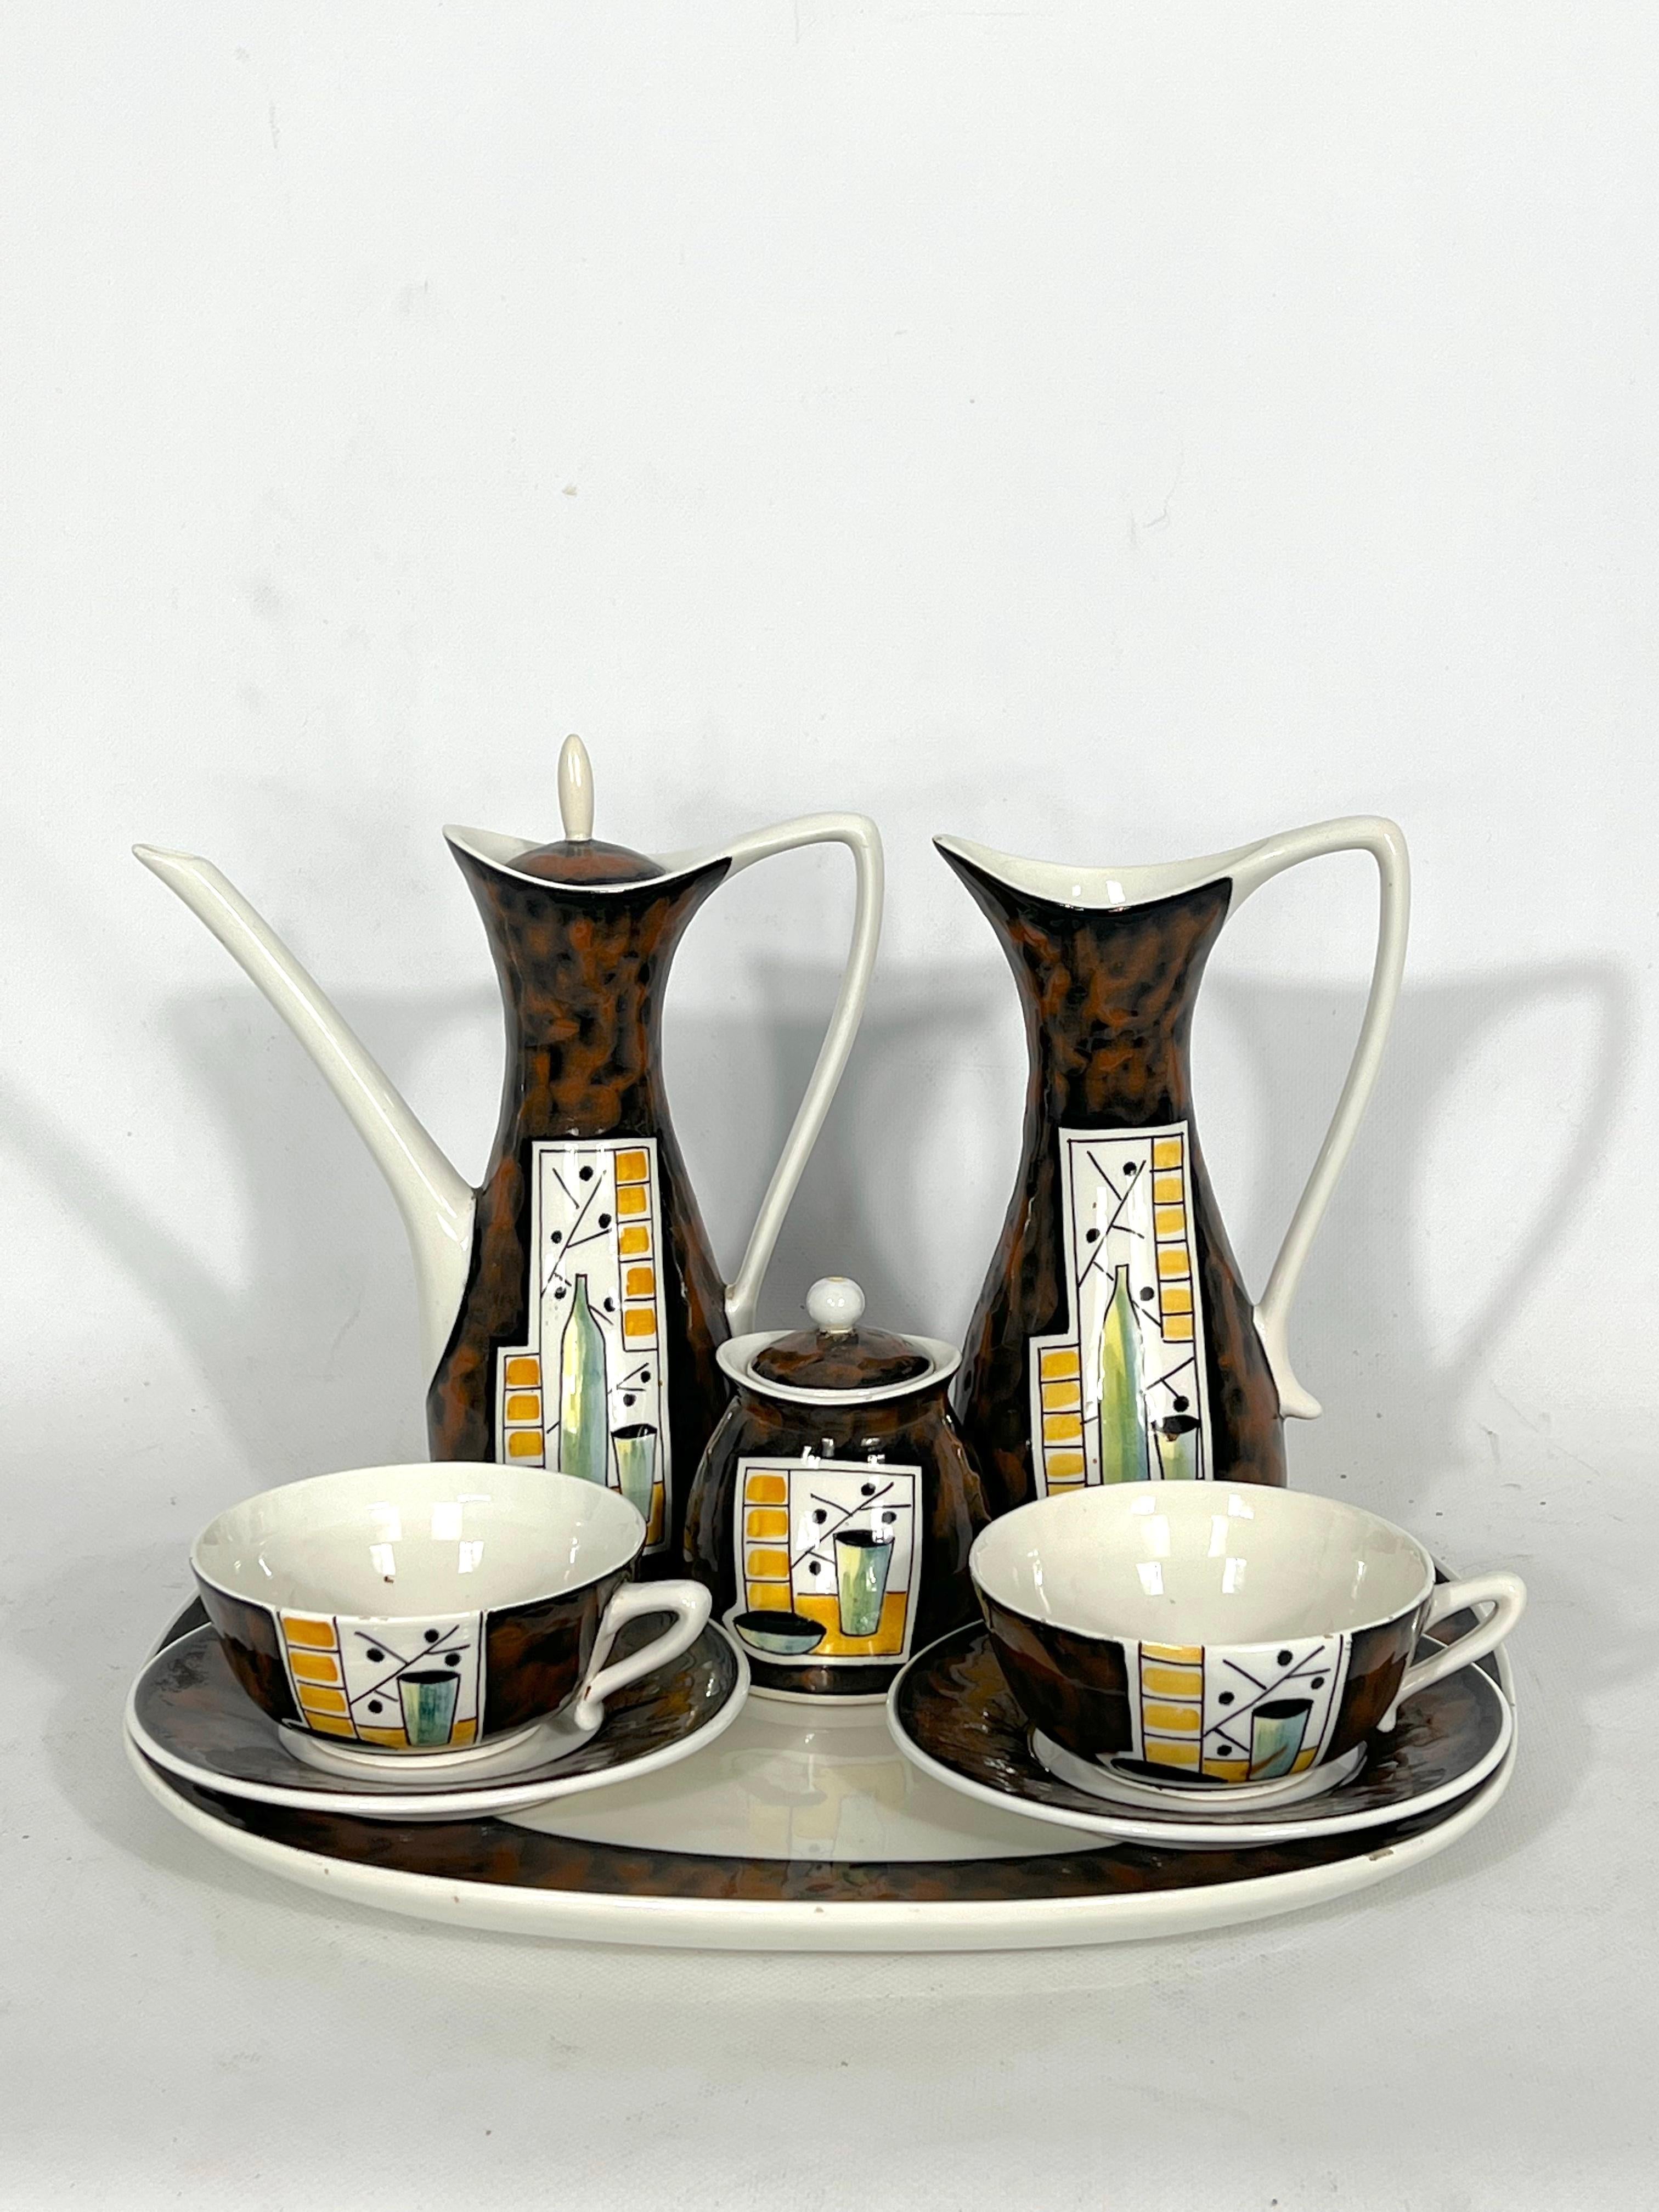 Good vintage condition with normal trace of age and use for this teapot set made from ceramic and produced in Italy during the 50s by Alfa Ceramiche.